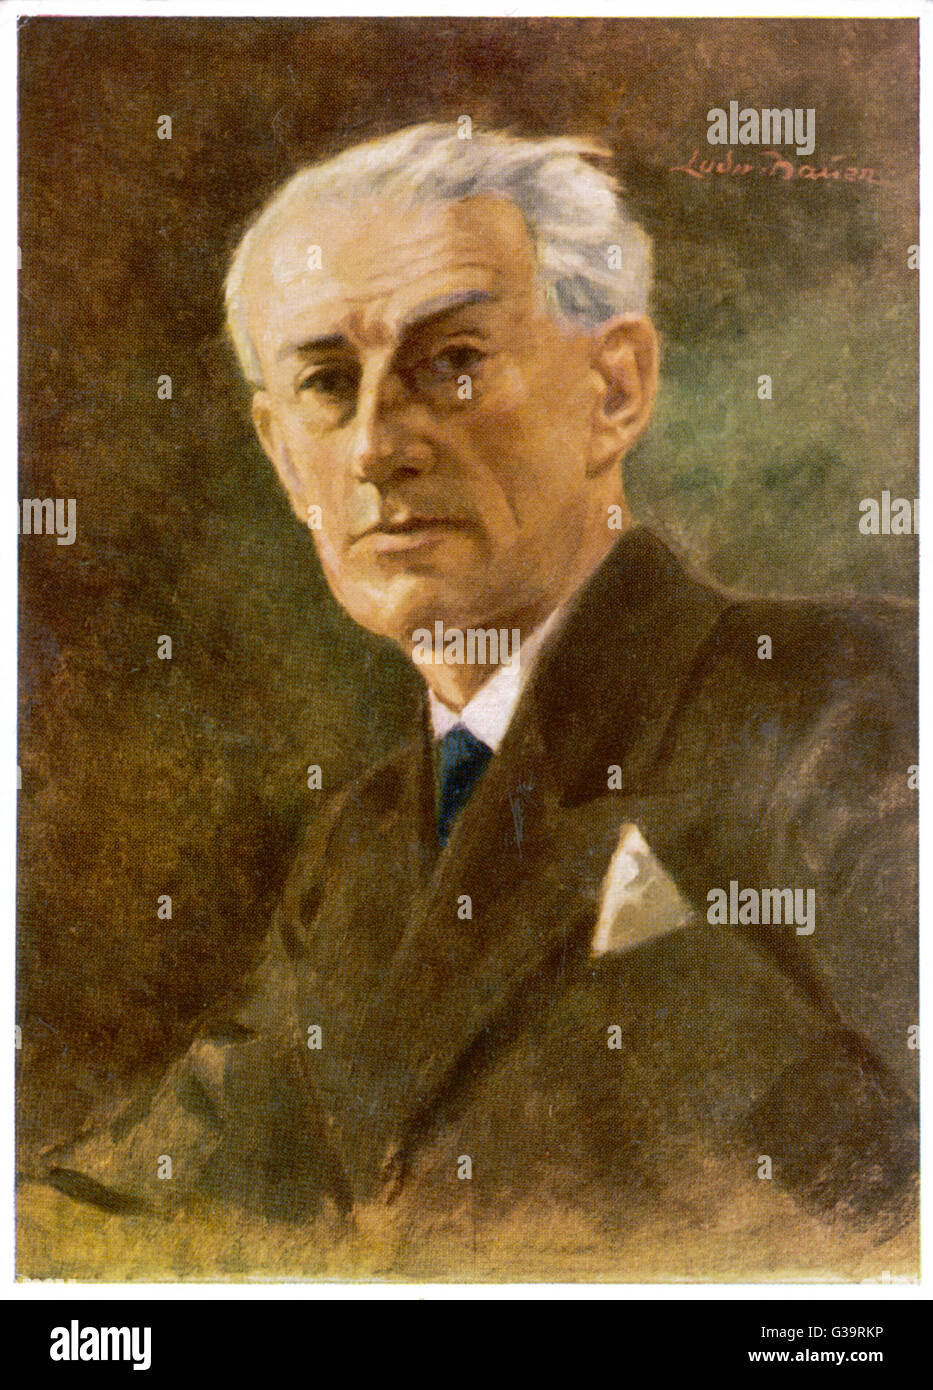 MAURICE RAVEL  French musician        Date: 1875 - 1937 Stock Photo